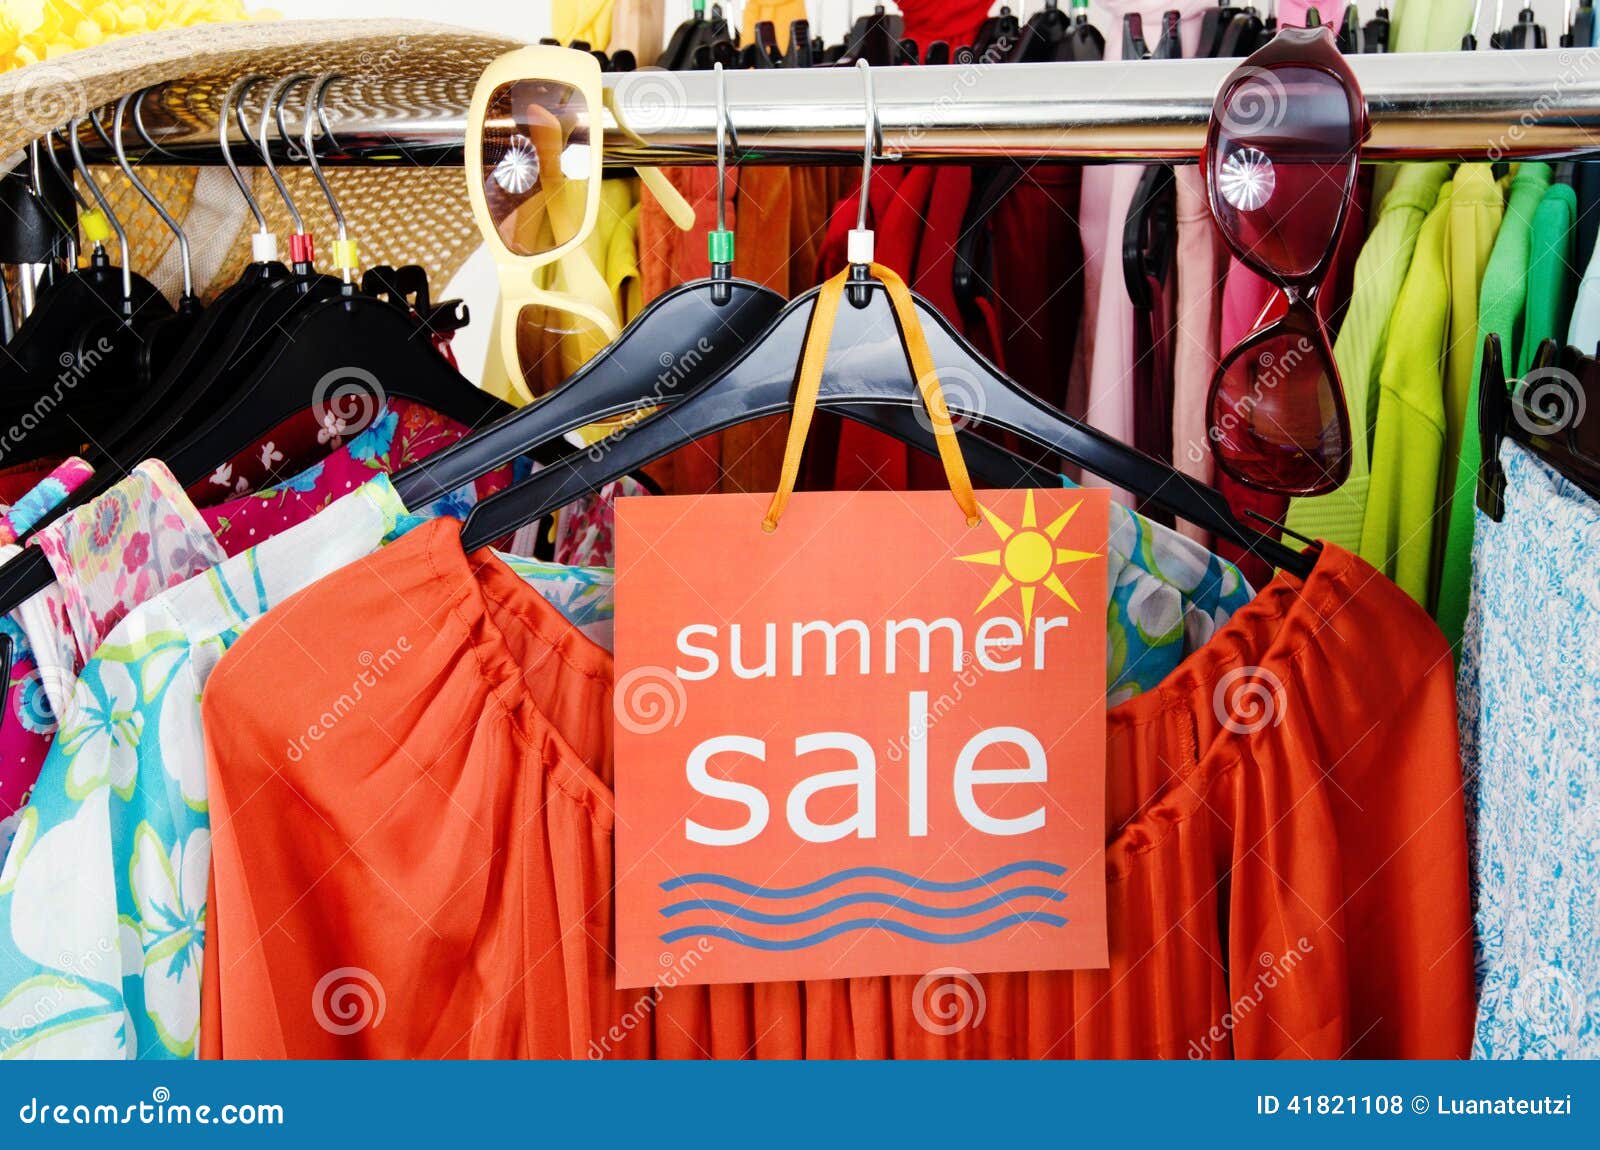 Close Up On A Big Sale Sign For Summer Clothes. Clearance Rack